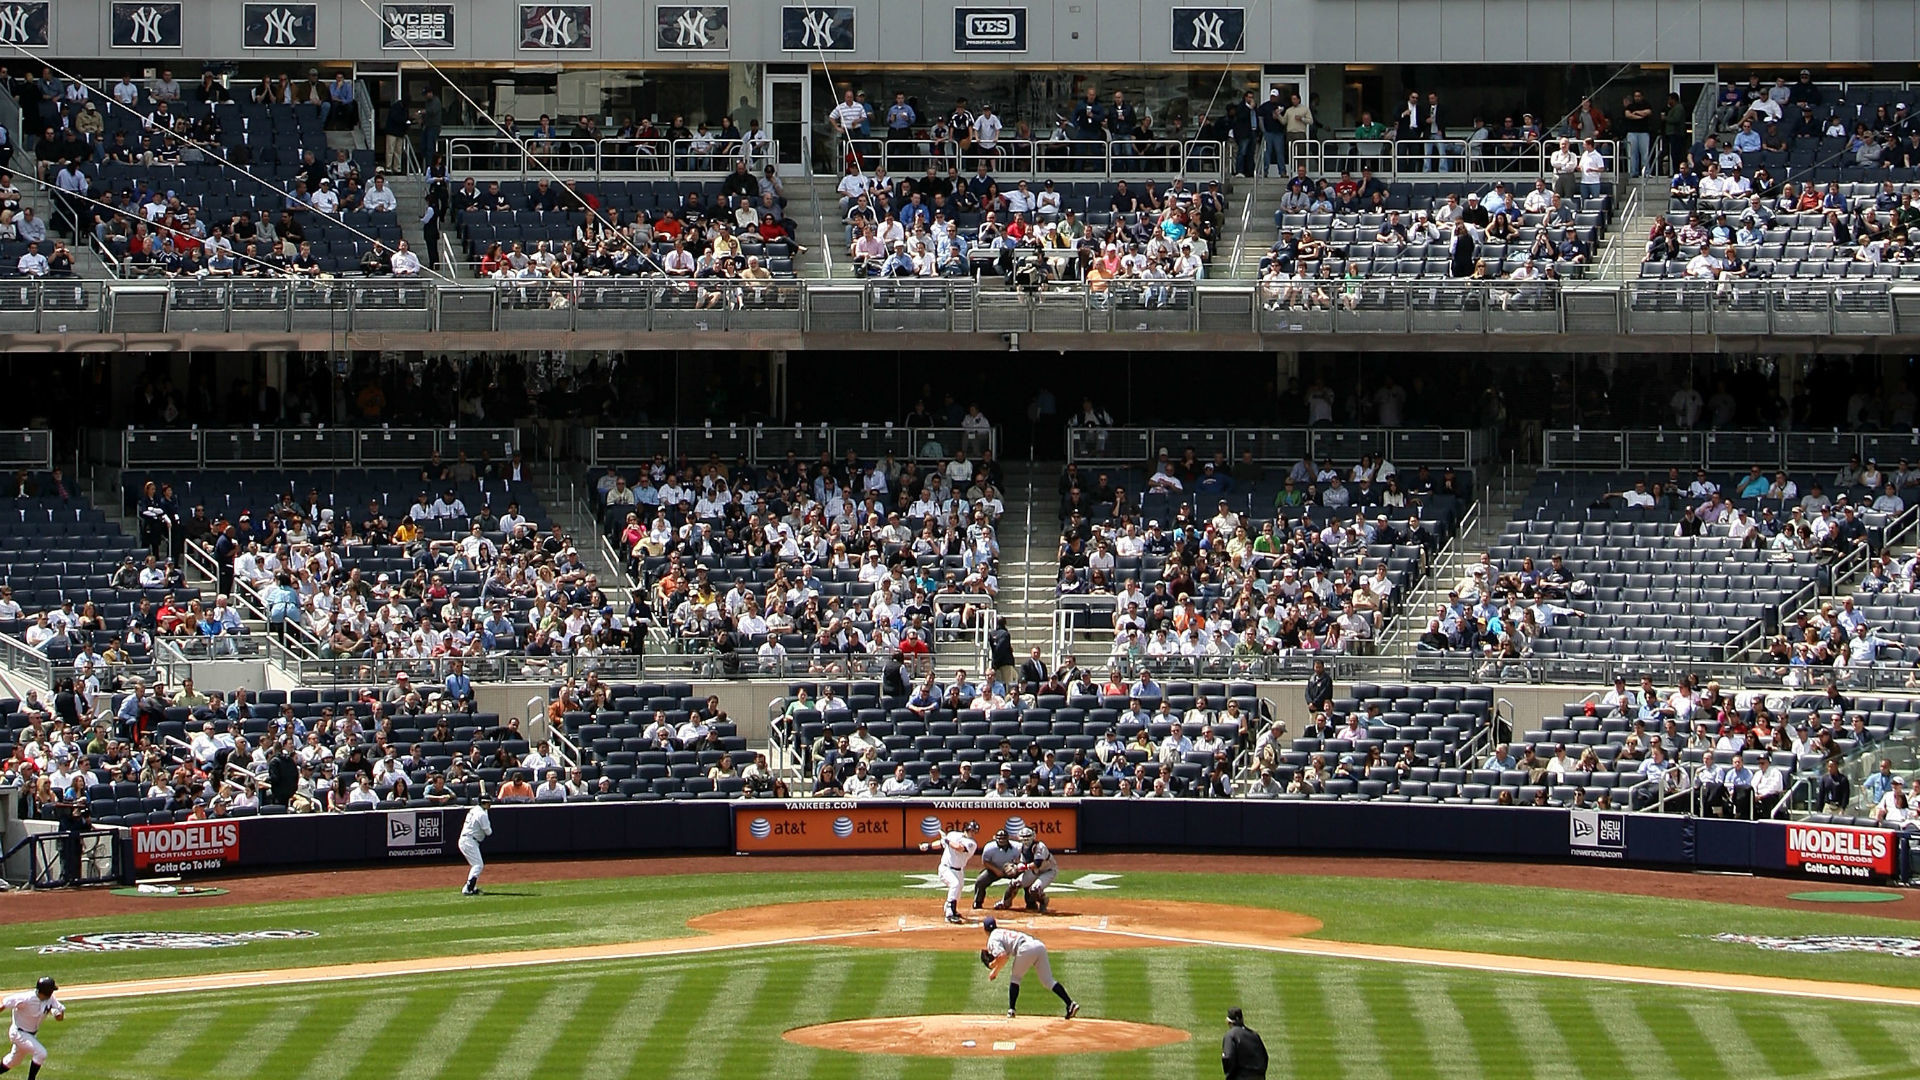 1920x1080 First-place Yankees struggling to sell tickets (again) | MLB | Sporting News